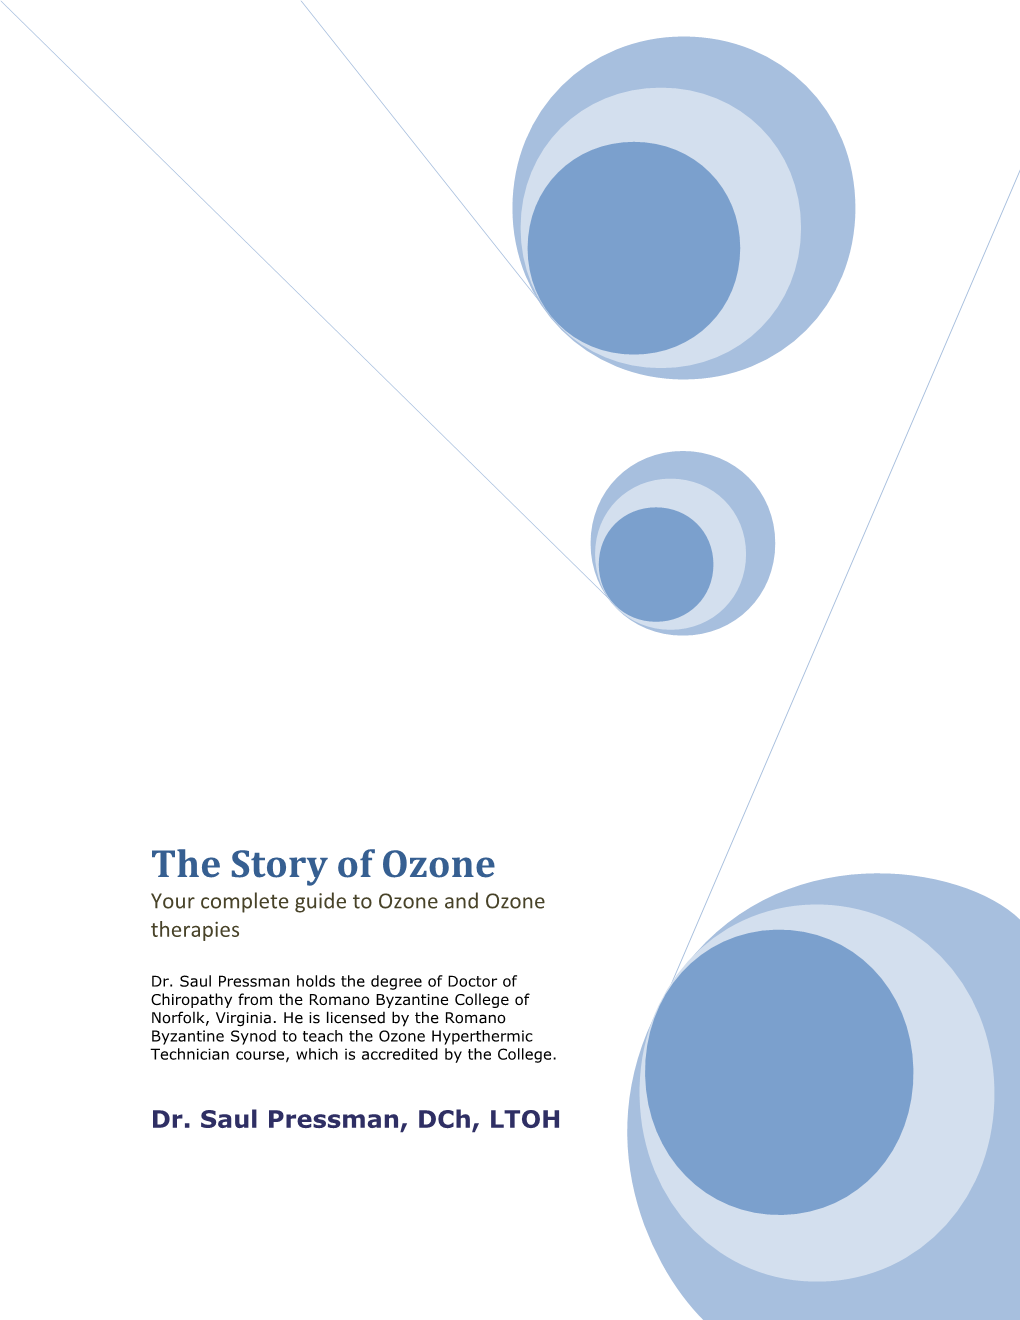 The Story of Ozone by Dr. Saul Pressman, Dch, LTOH